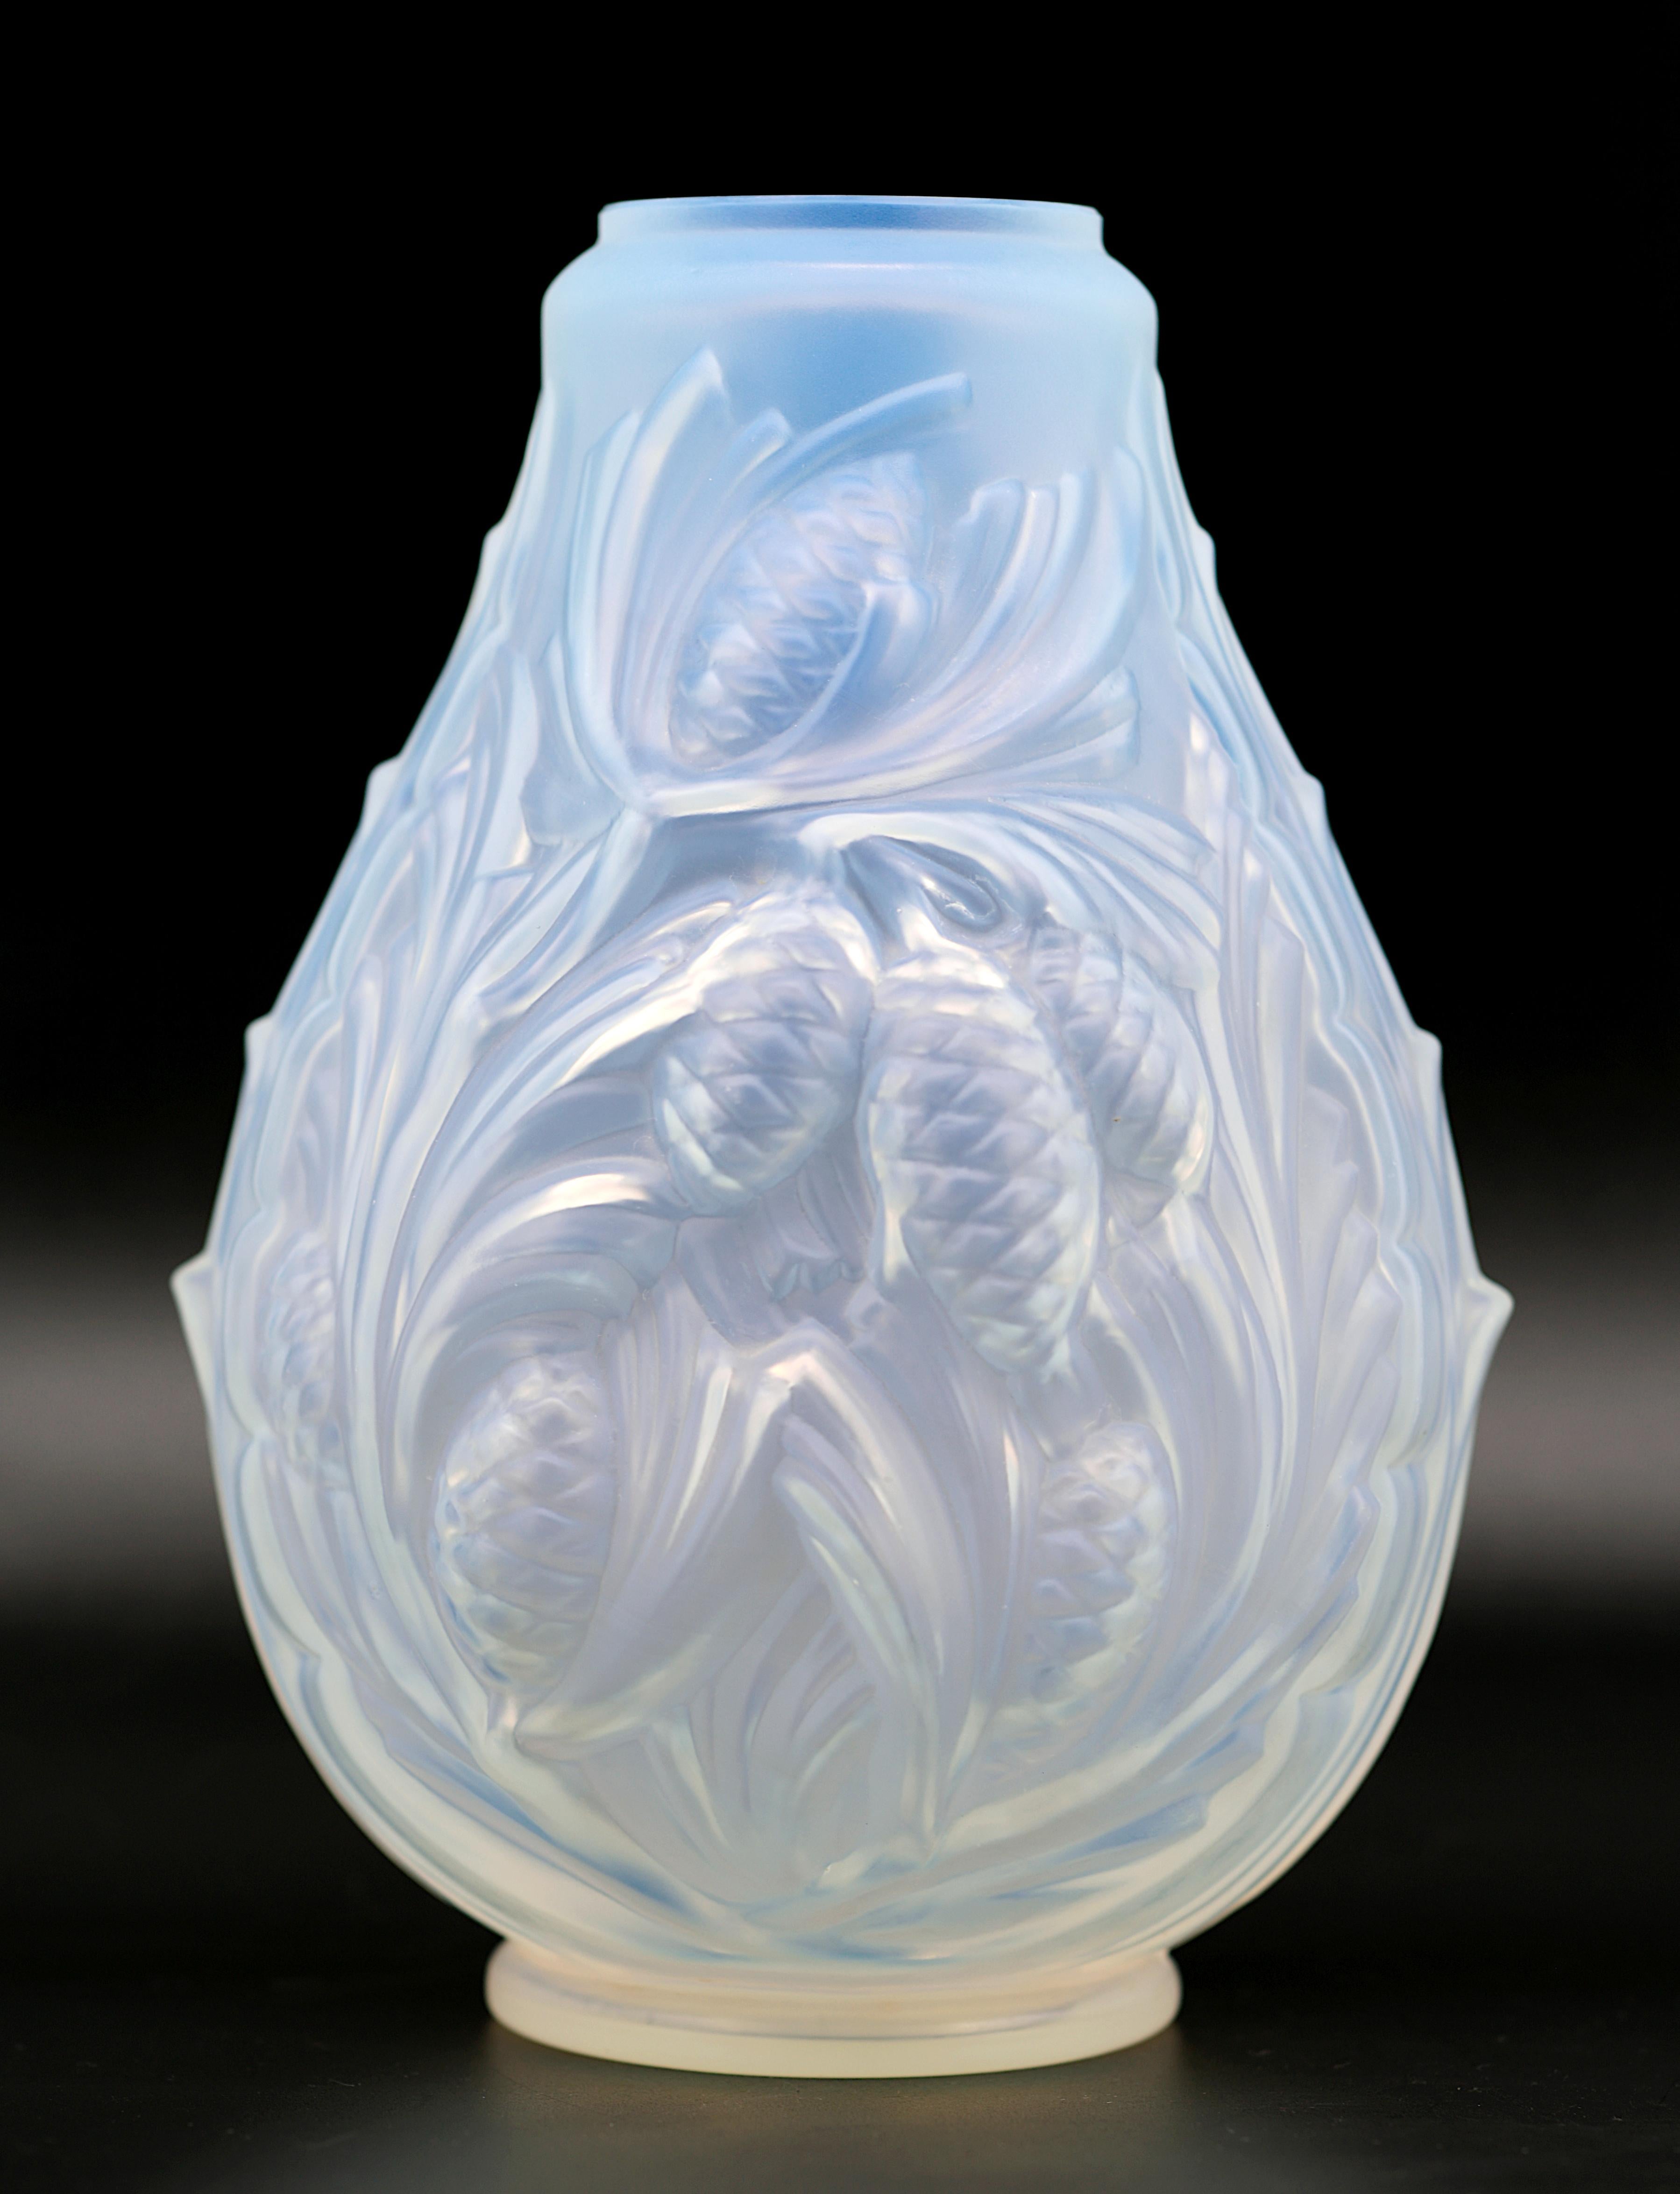 French Art Deco vase by CHOISY-LE-ROI for ETLING (Paris), France, ca.1930. Thick opalescent molded glass showing a pine cone pattern. Height: 10.6